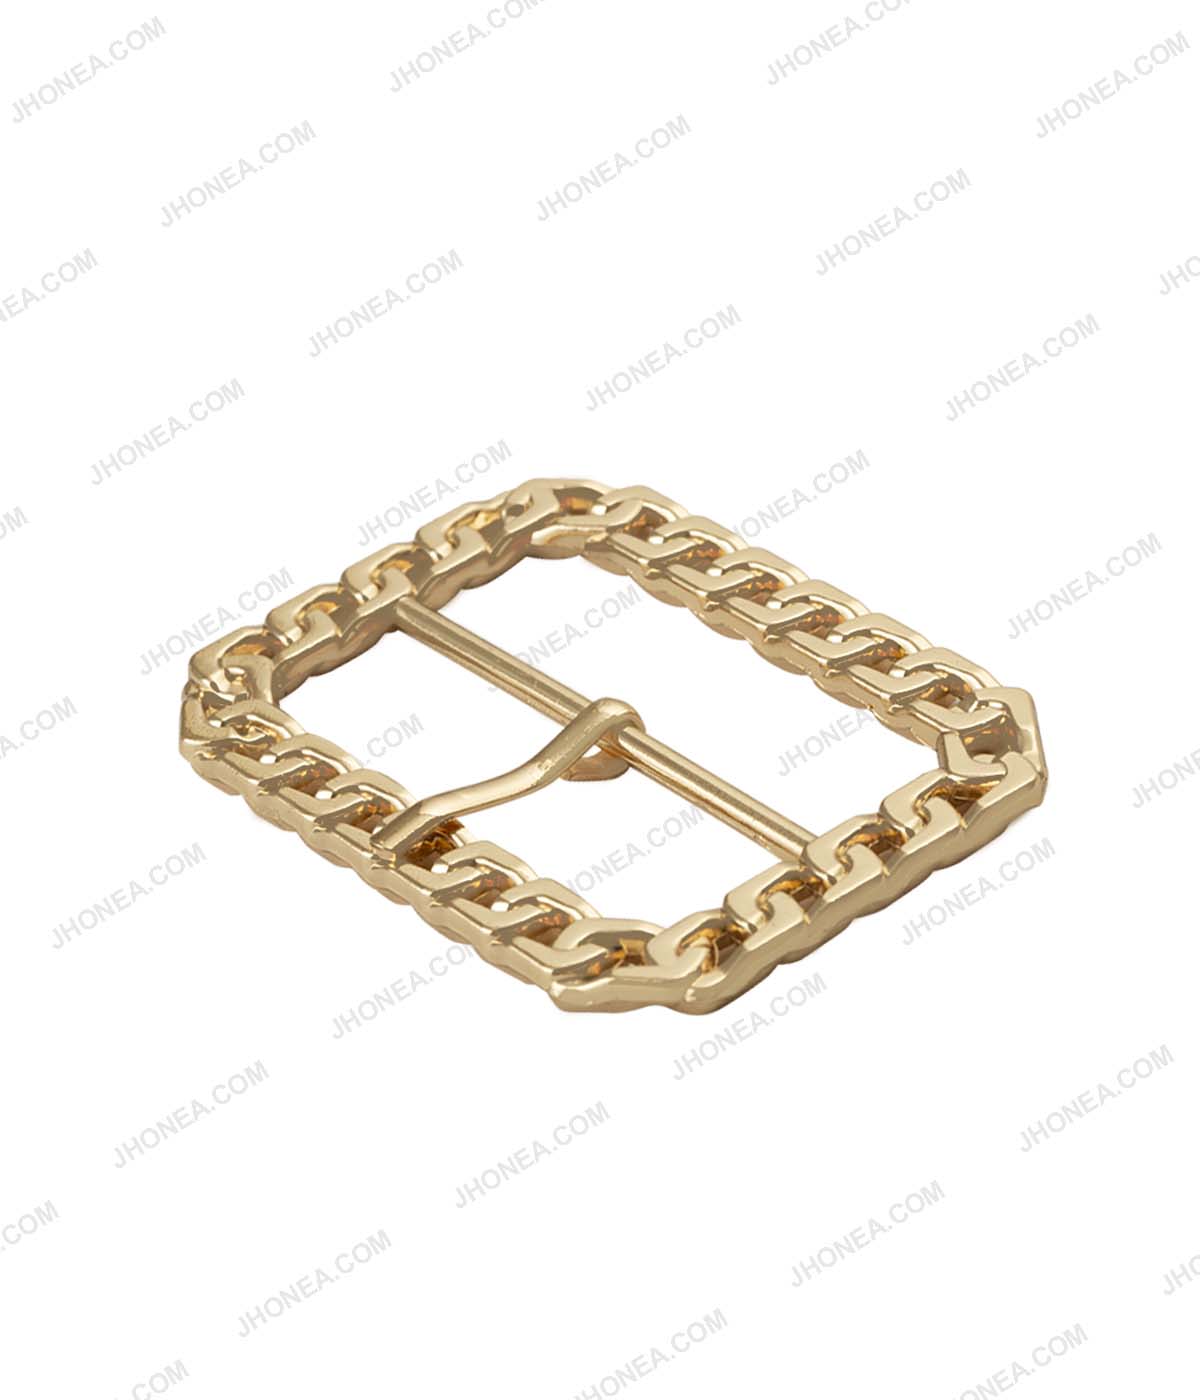 Rounded Rectangle Frame Shiny Gold Chain Design Prong Belt Buckle